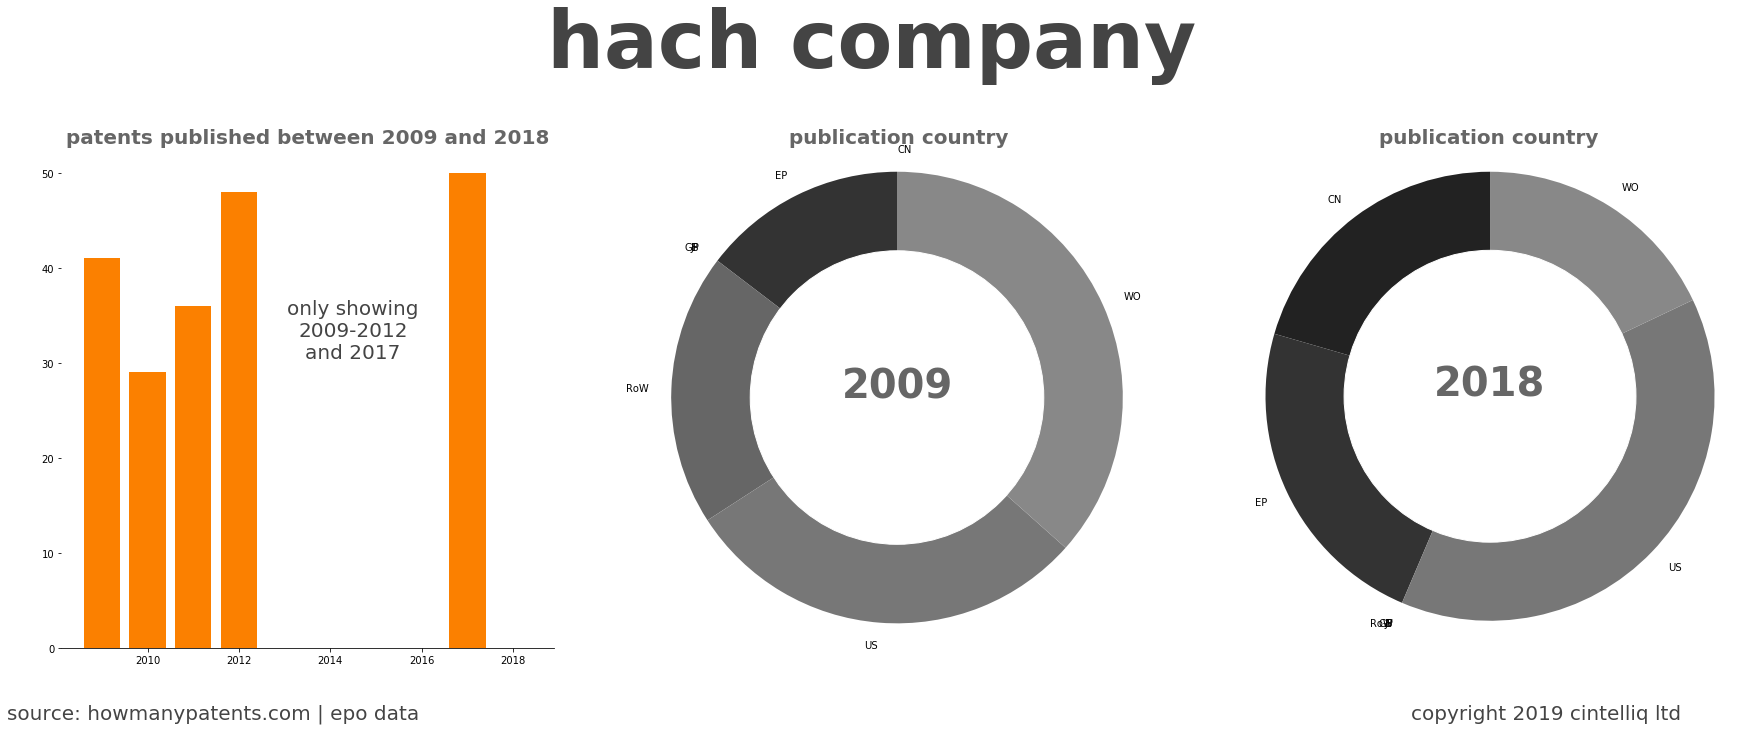 summary of patents for Hach Company